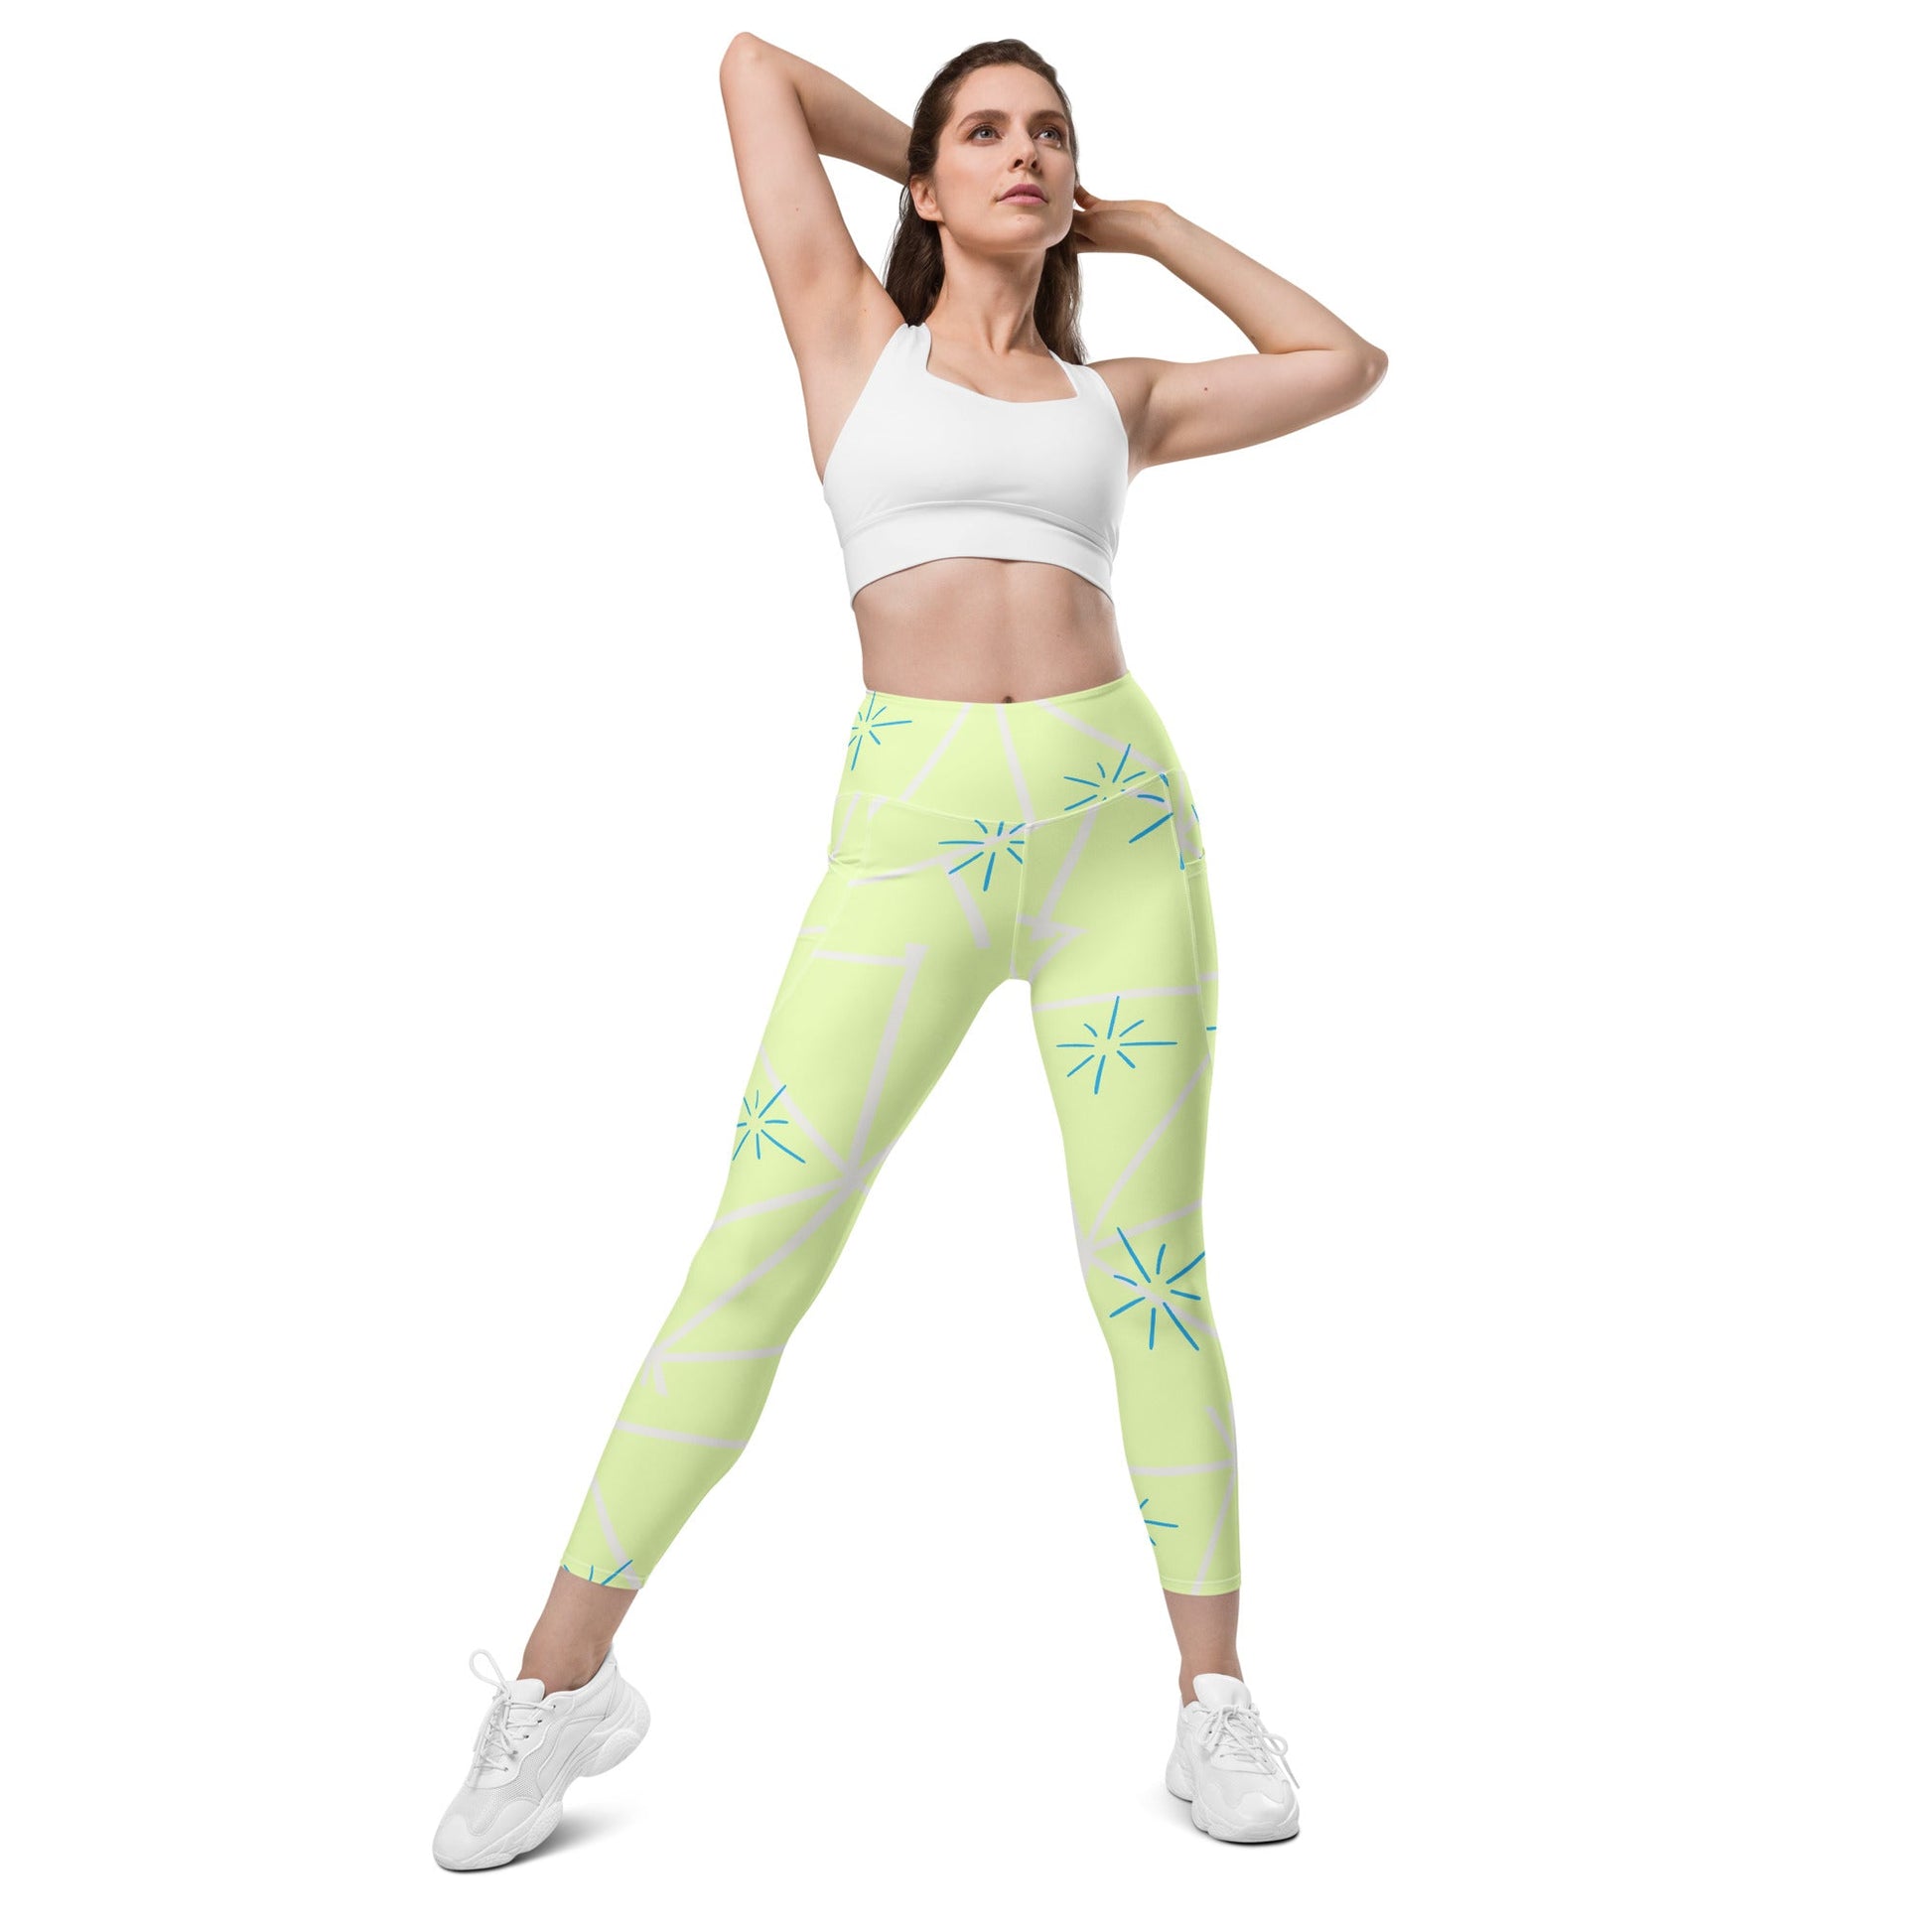 The Joy Leggings with pockets active wearcosplaycosplay style#tag4##tag5##tag6#